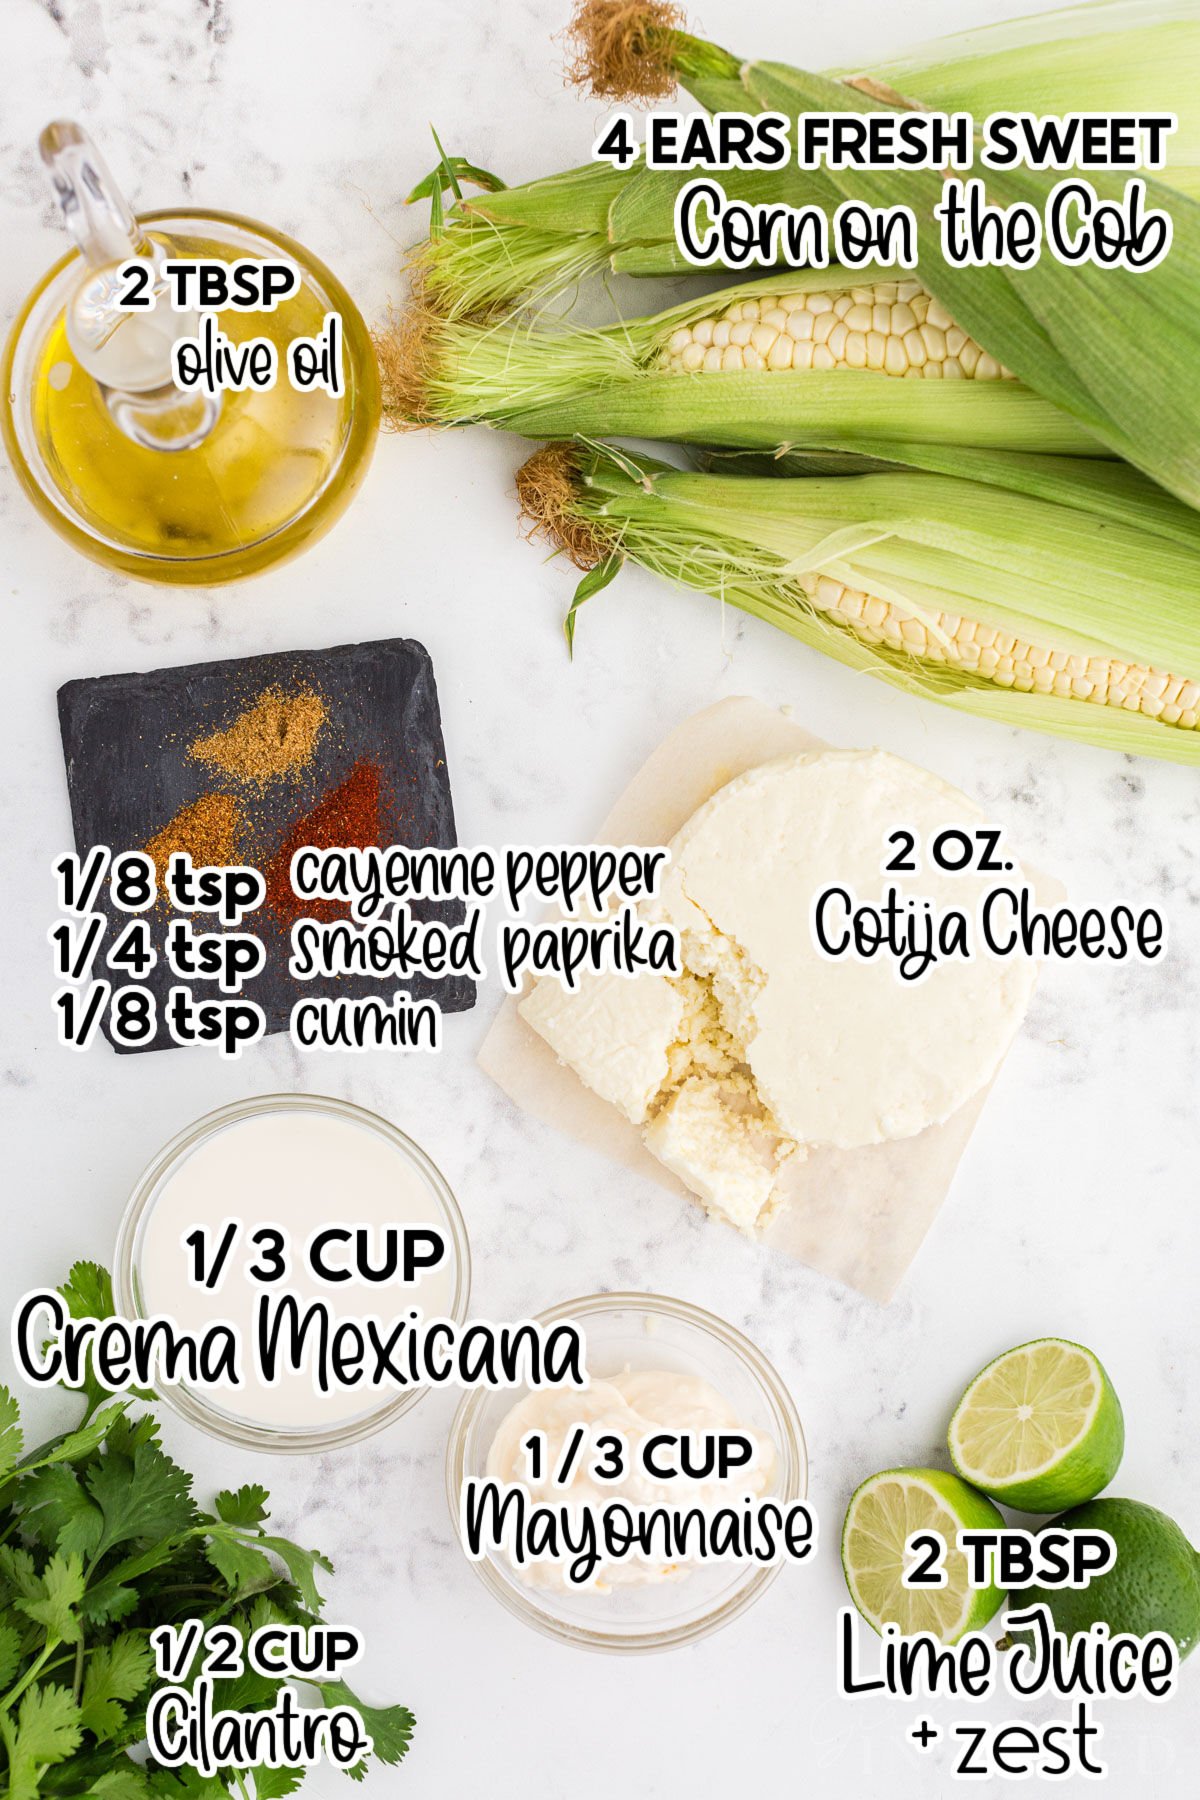 Individual ingredients for Mexican street corn on the cob set out with text and amount labels.